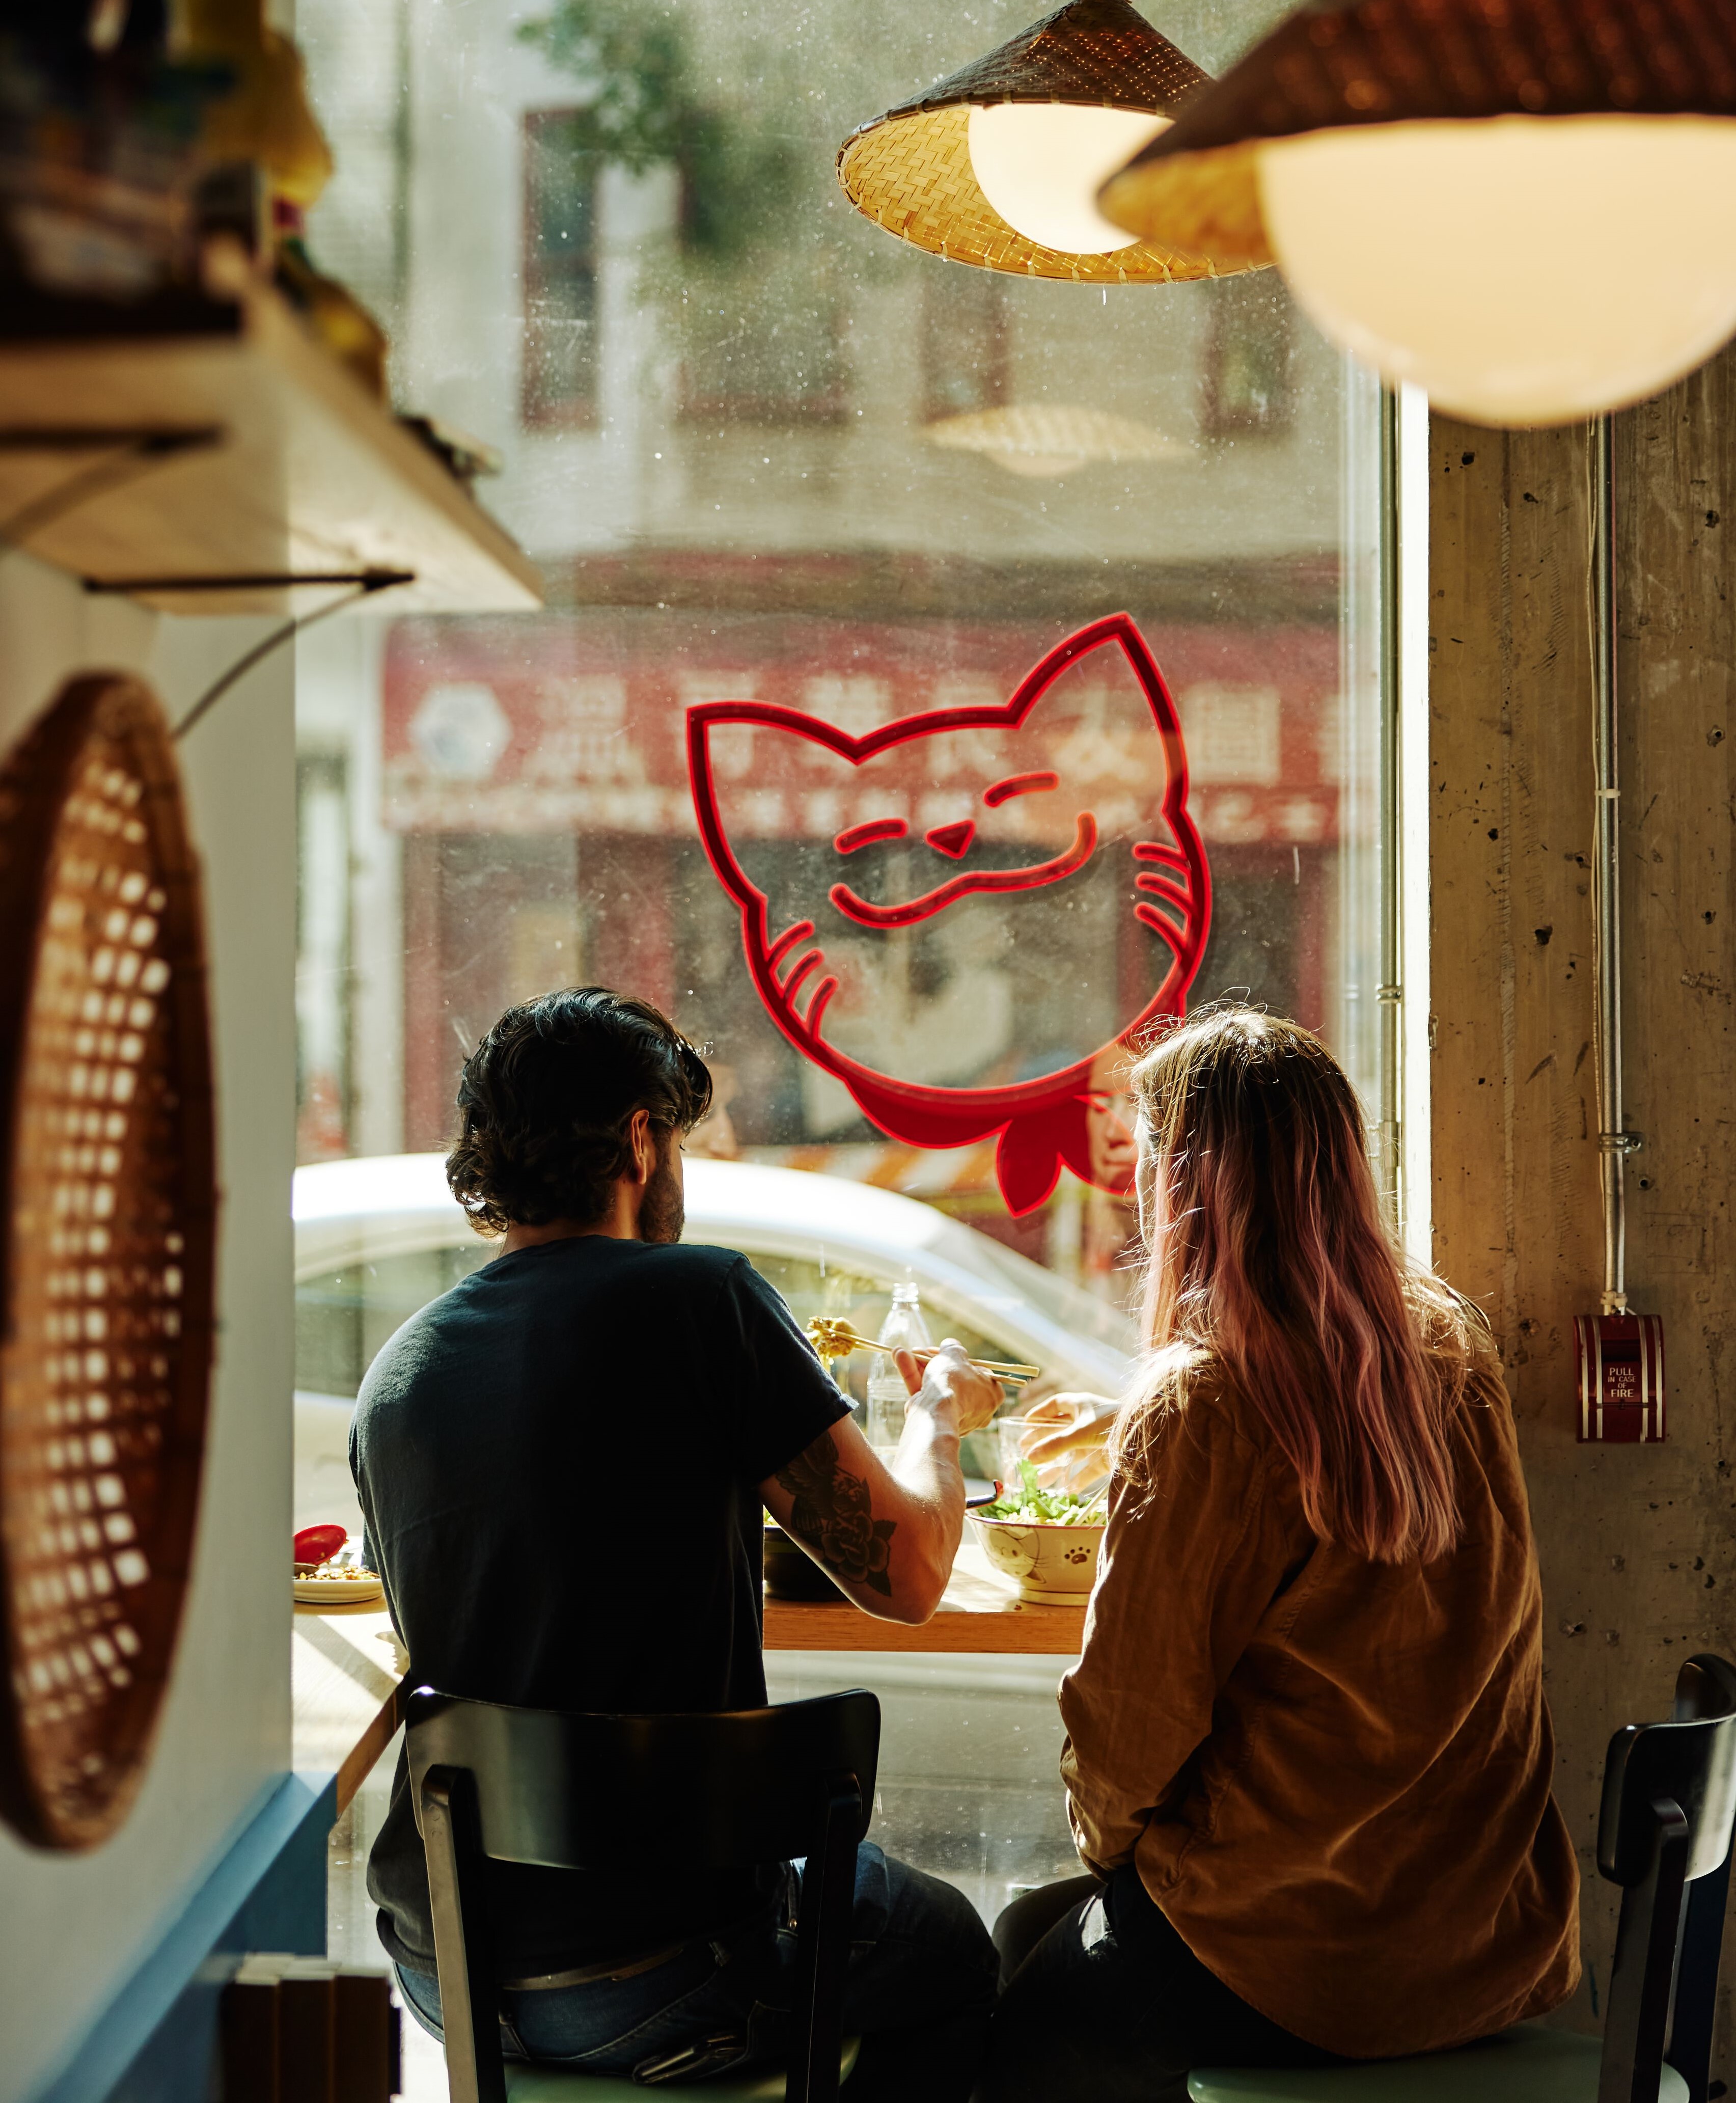 Two diners sit on stools at a window at Fat Mao Noodles in Vancouver's Chinatown. There is a decal of a cat outline in red on the window in front of them.